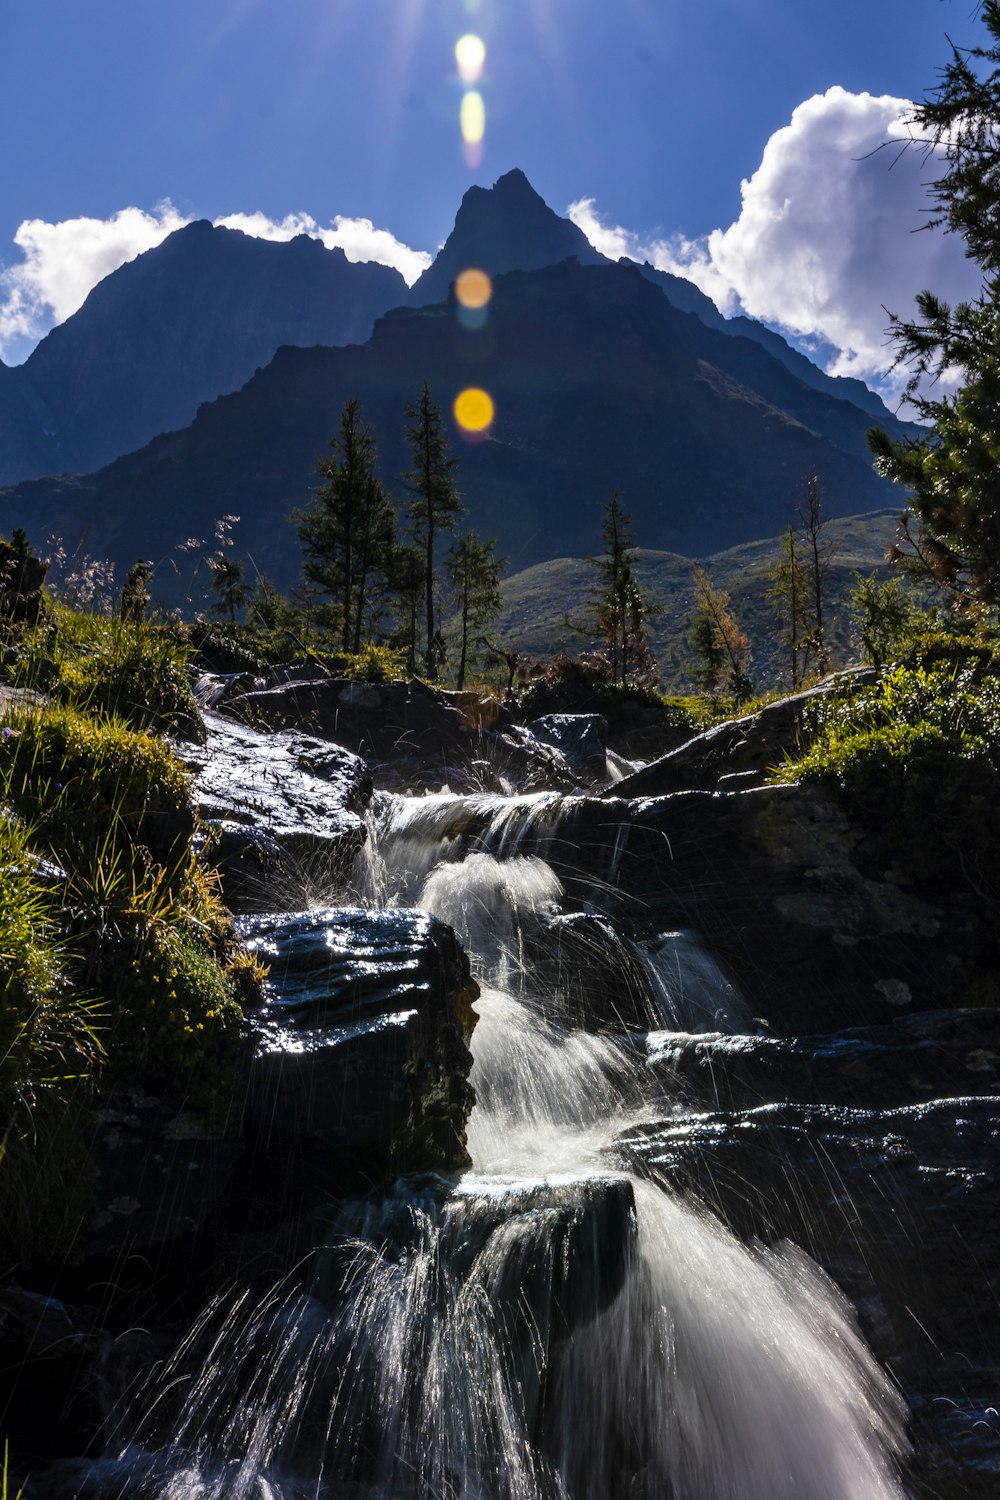 the sun shines brightly over a small waterfall